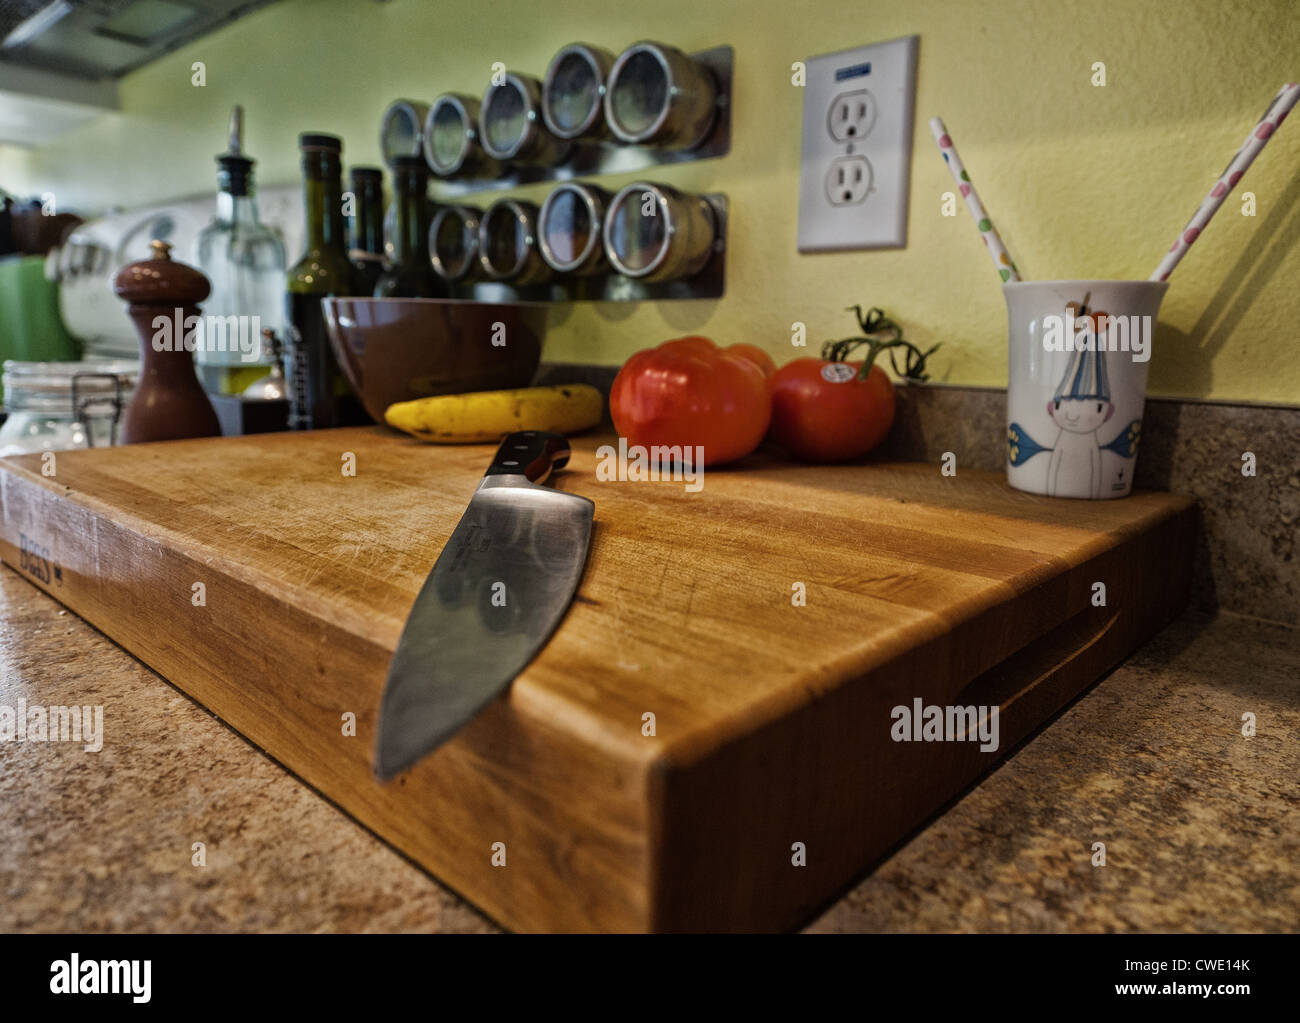 A knife on a cutting board Stock Photo